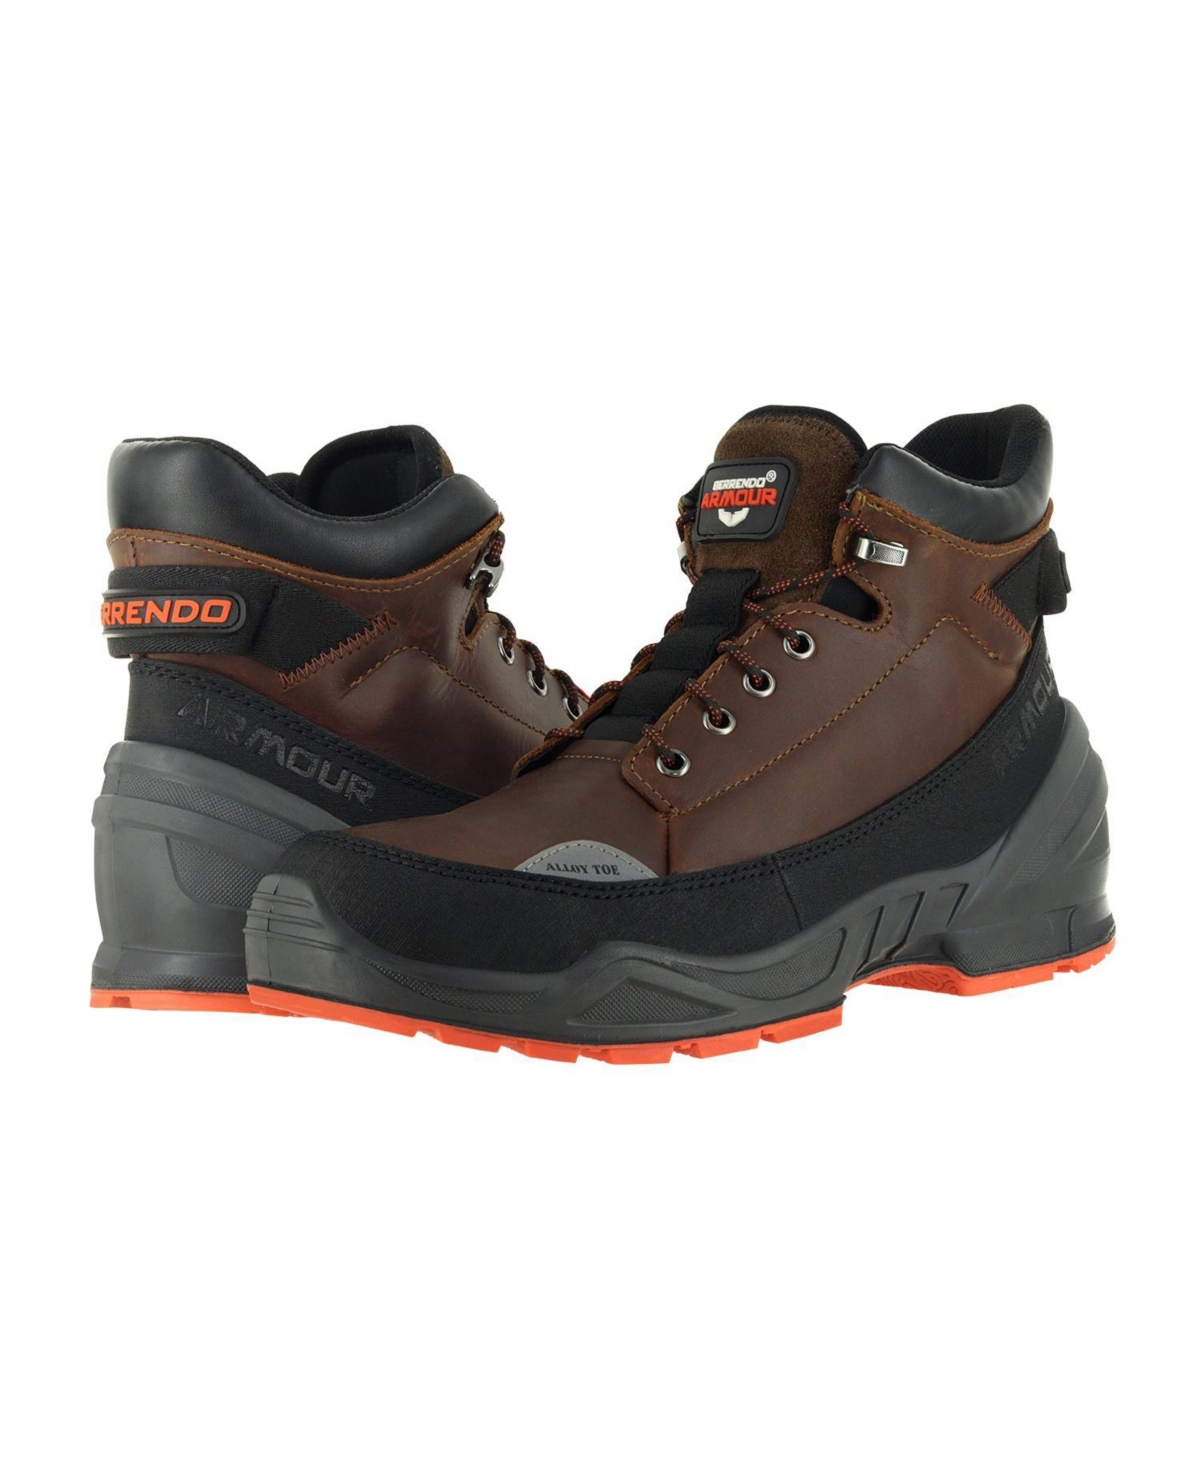 Work Boots For Men 6" - Alloy Toe Boots - Rust